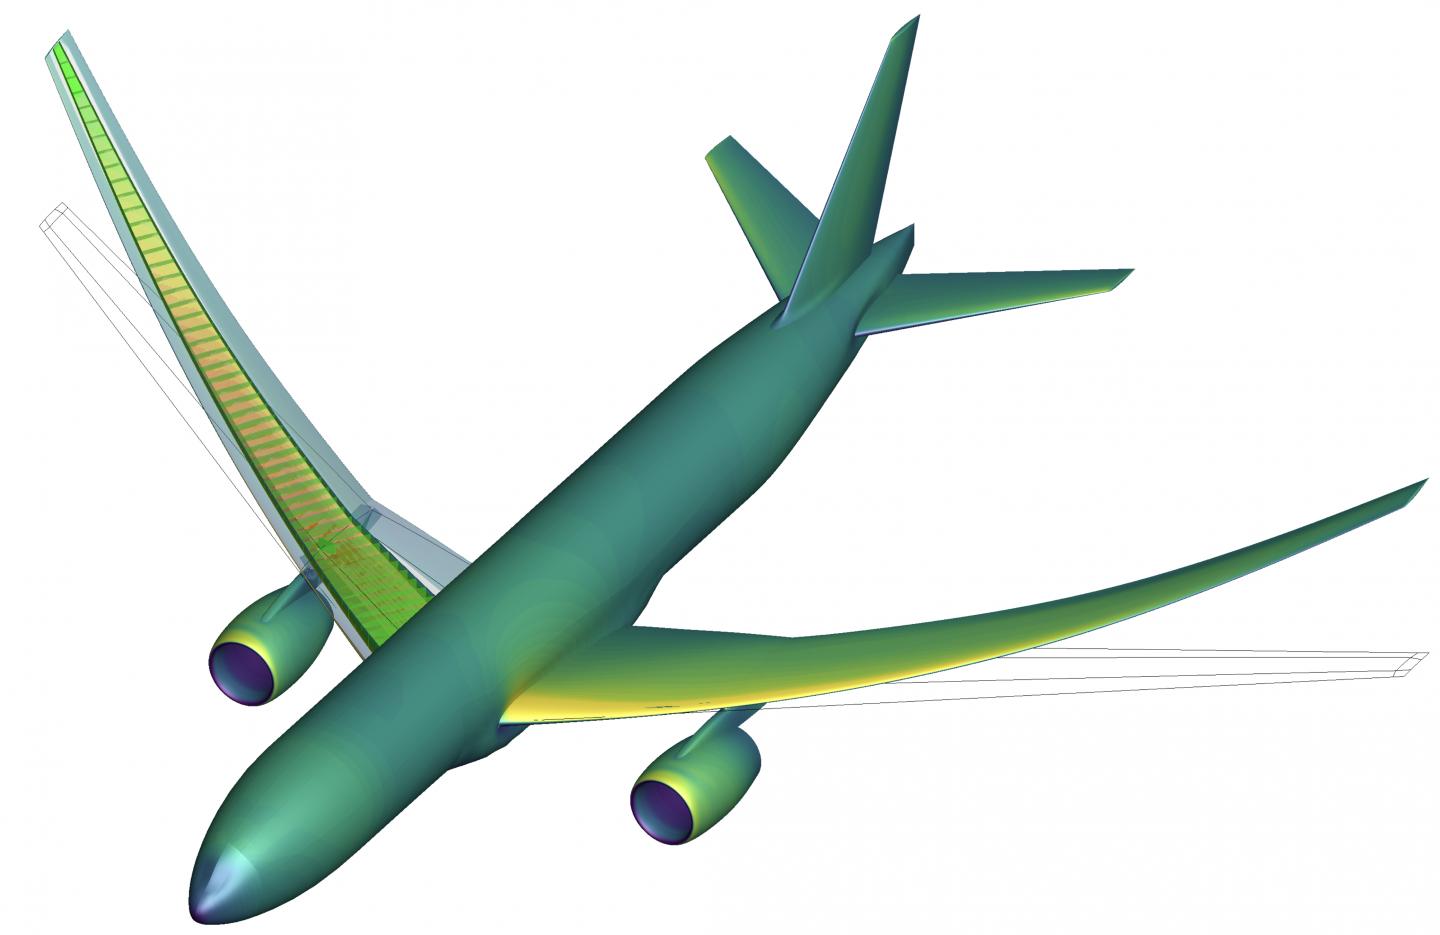 New, High Aspect Ratio Wing Designs for Fuel Efficiency